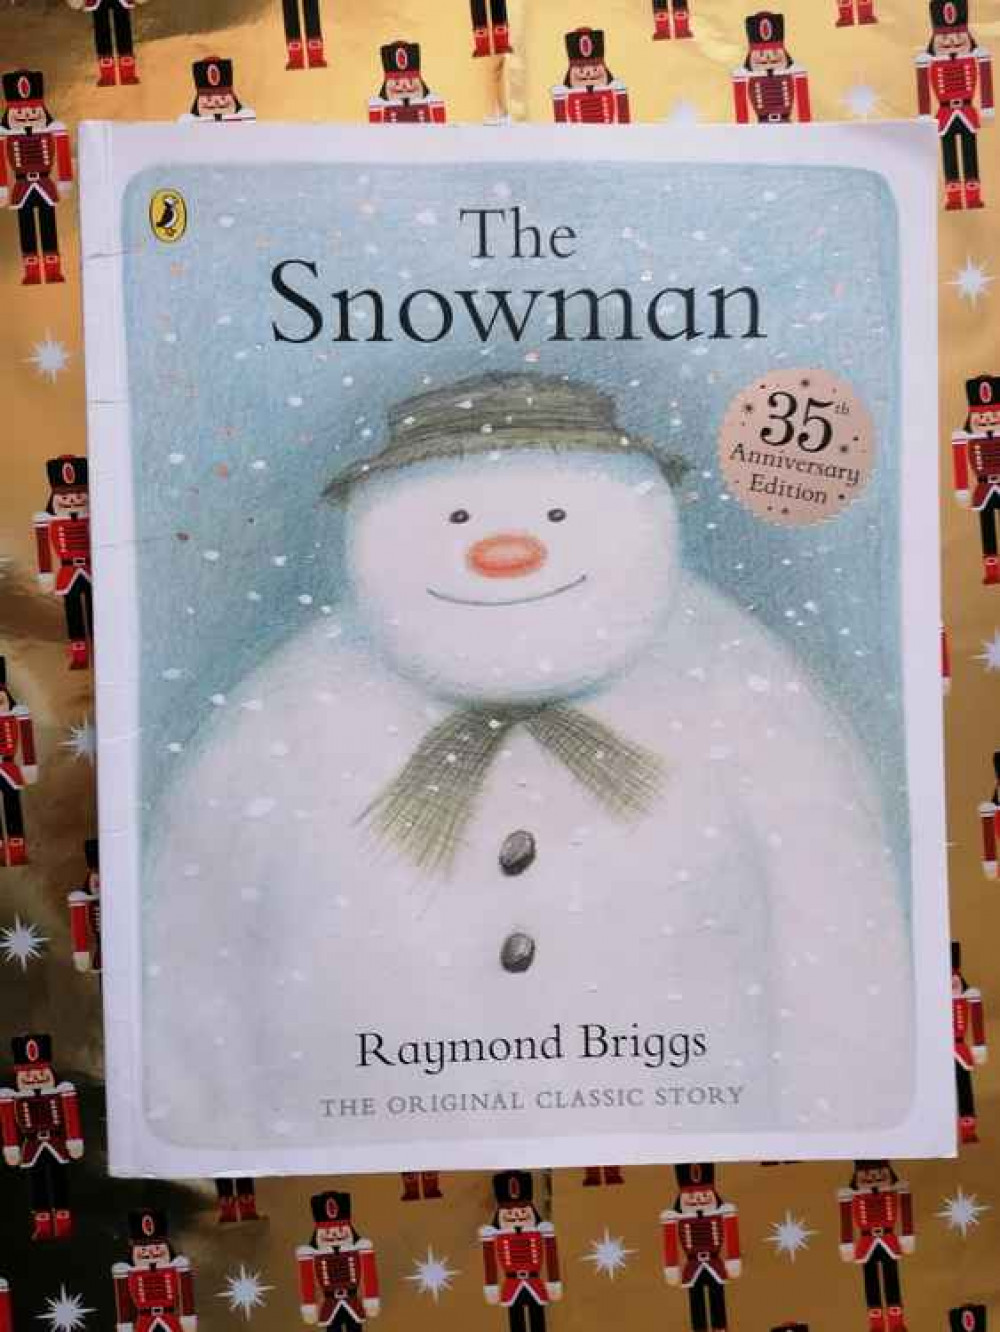 Hitchin Library and Nub News: Countdown to Christmas with festive book favourites for Thursday, December 3 - The Snowman